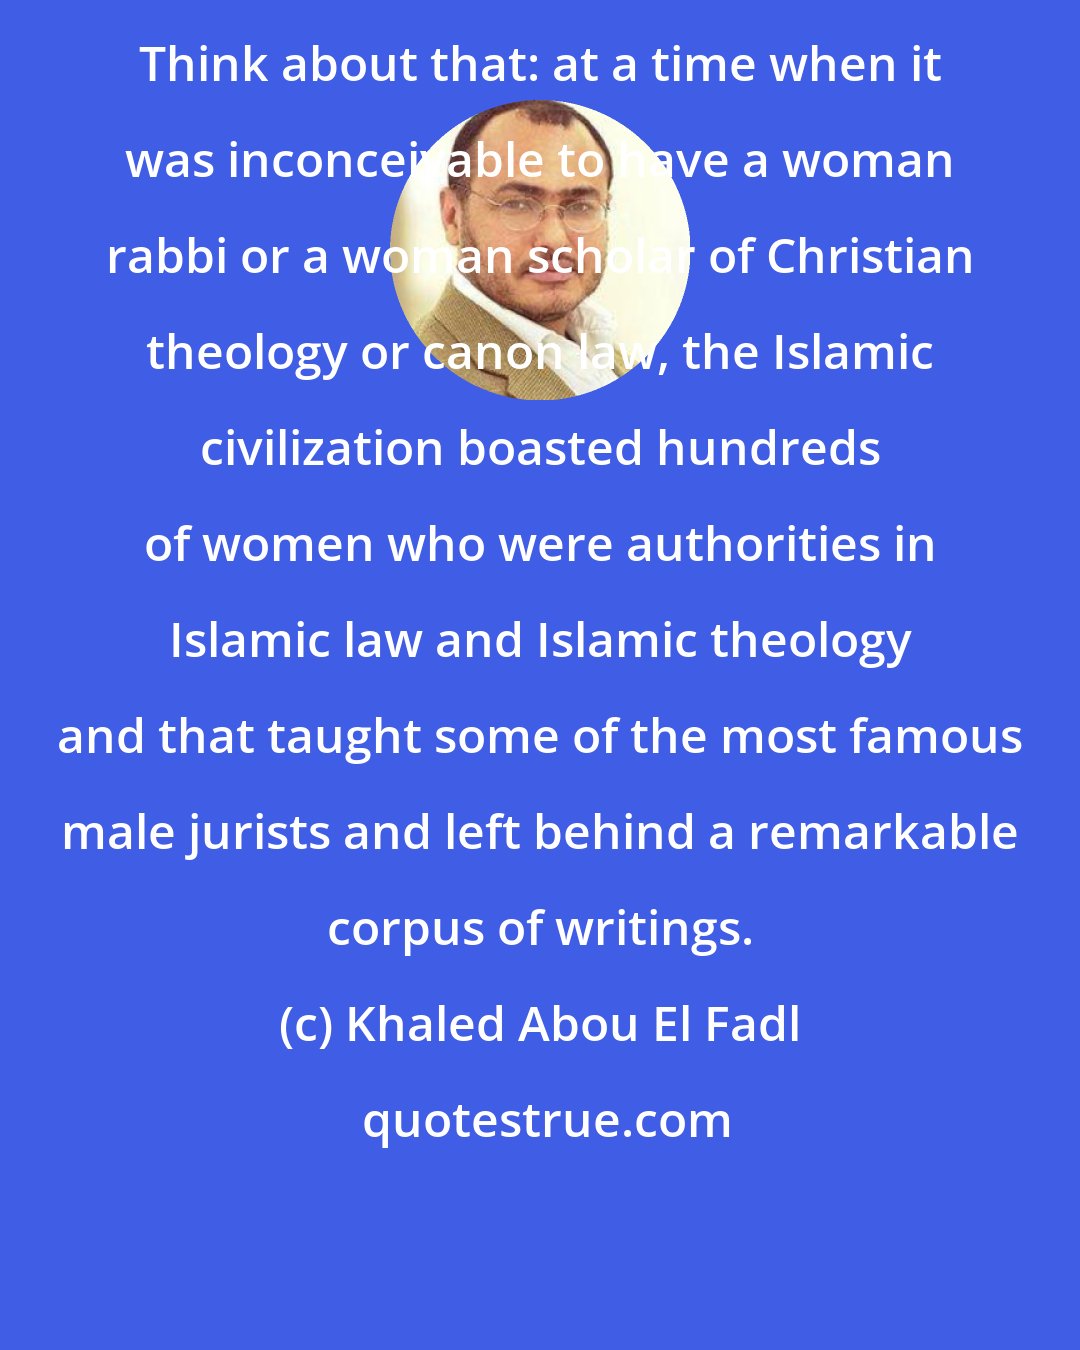 Khaled Abou El Fadl: Think about that: at a time when it was inconceivable to have a woman rabbi or a woman scholar of Christian theology or canon law, the Islamic civilization boasted hundreds of women who were authorities in Islamic law and Islamic theology and that taught some of the most famous male jurists and left behind a remarkable corpus of writings.